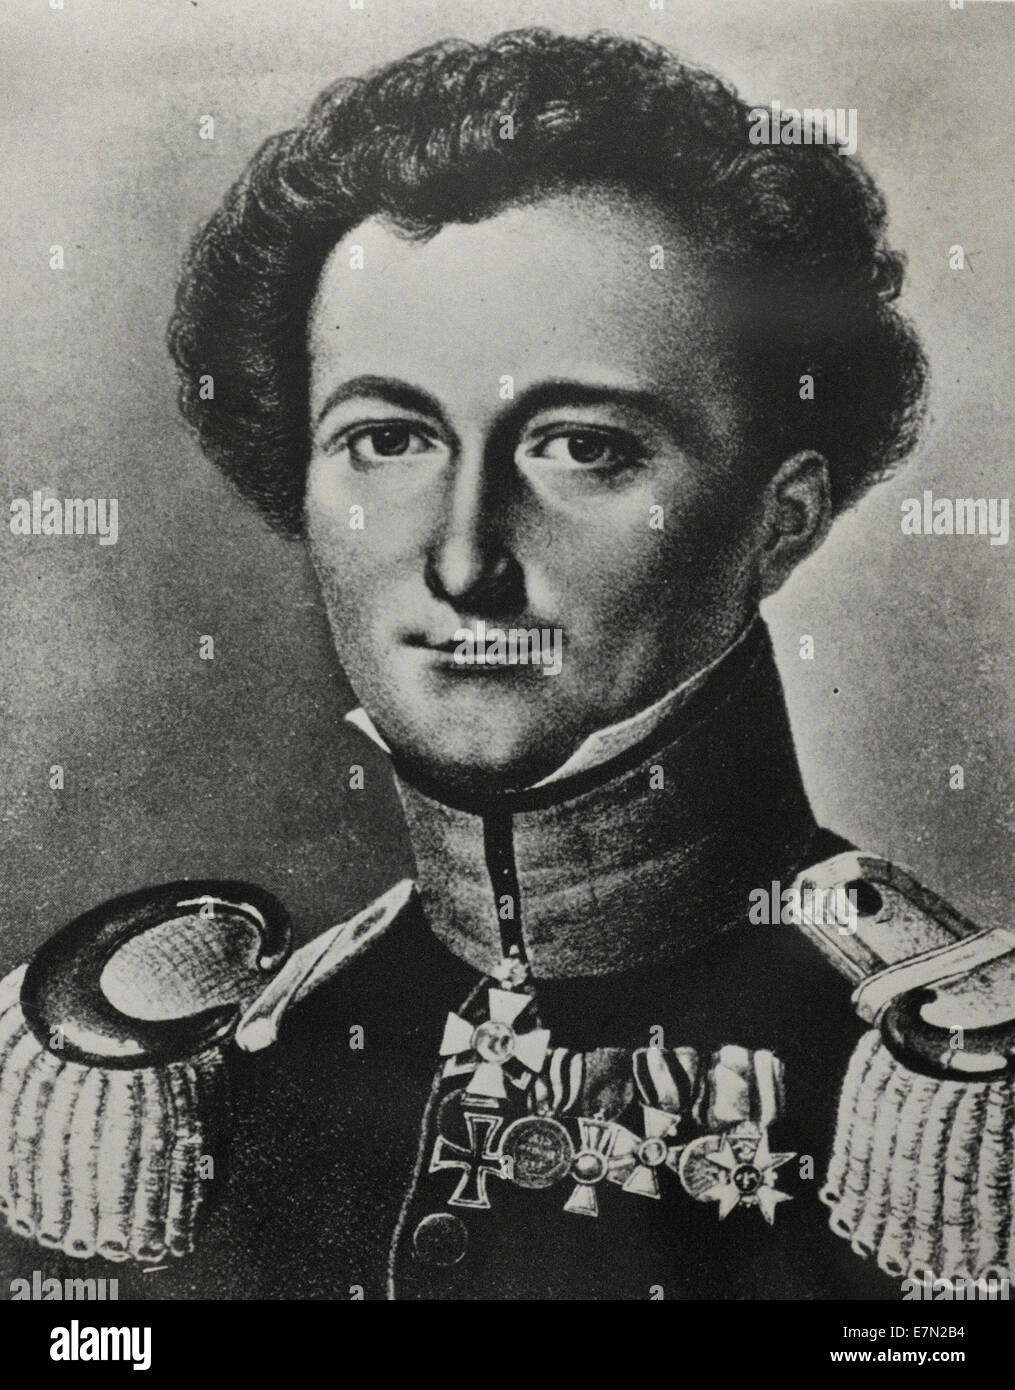 Karl Von Clausewitz 1780 - 1831. Carl Philipp Gottfried 'Gottlieb' von Clausewitz was a German (Prussian) general and military theorist who stressed the moral and political aspects of war Stock Photo